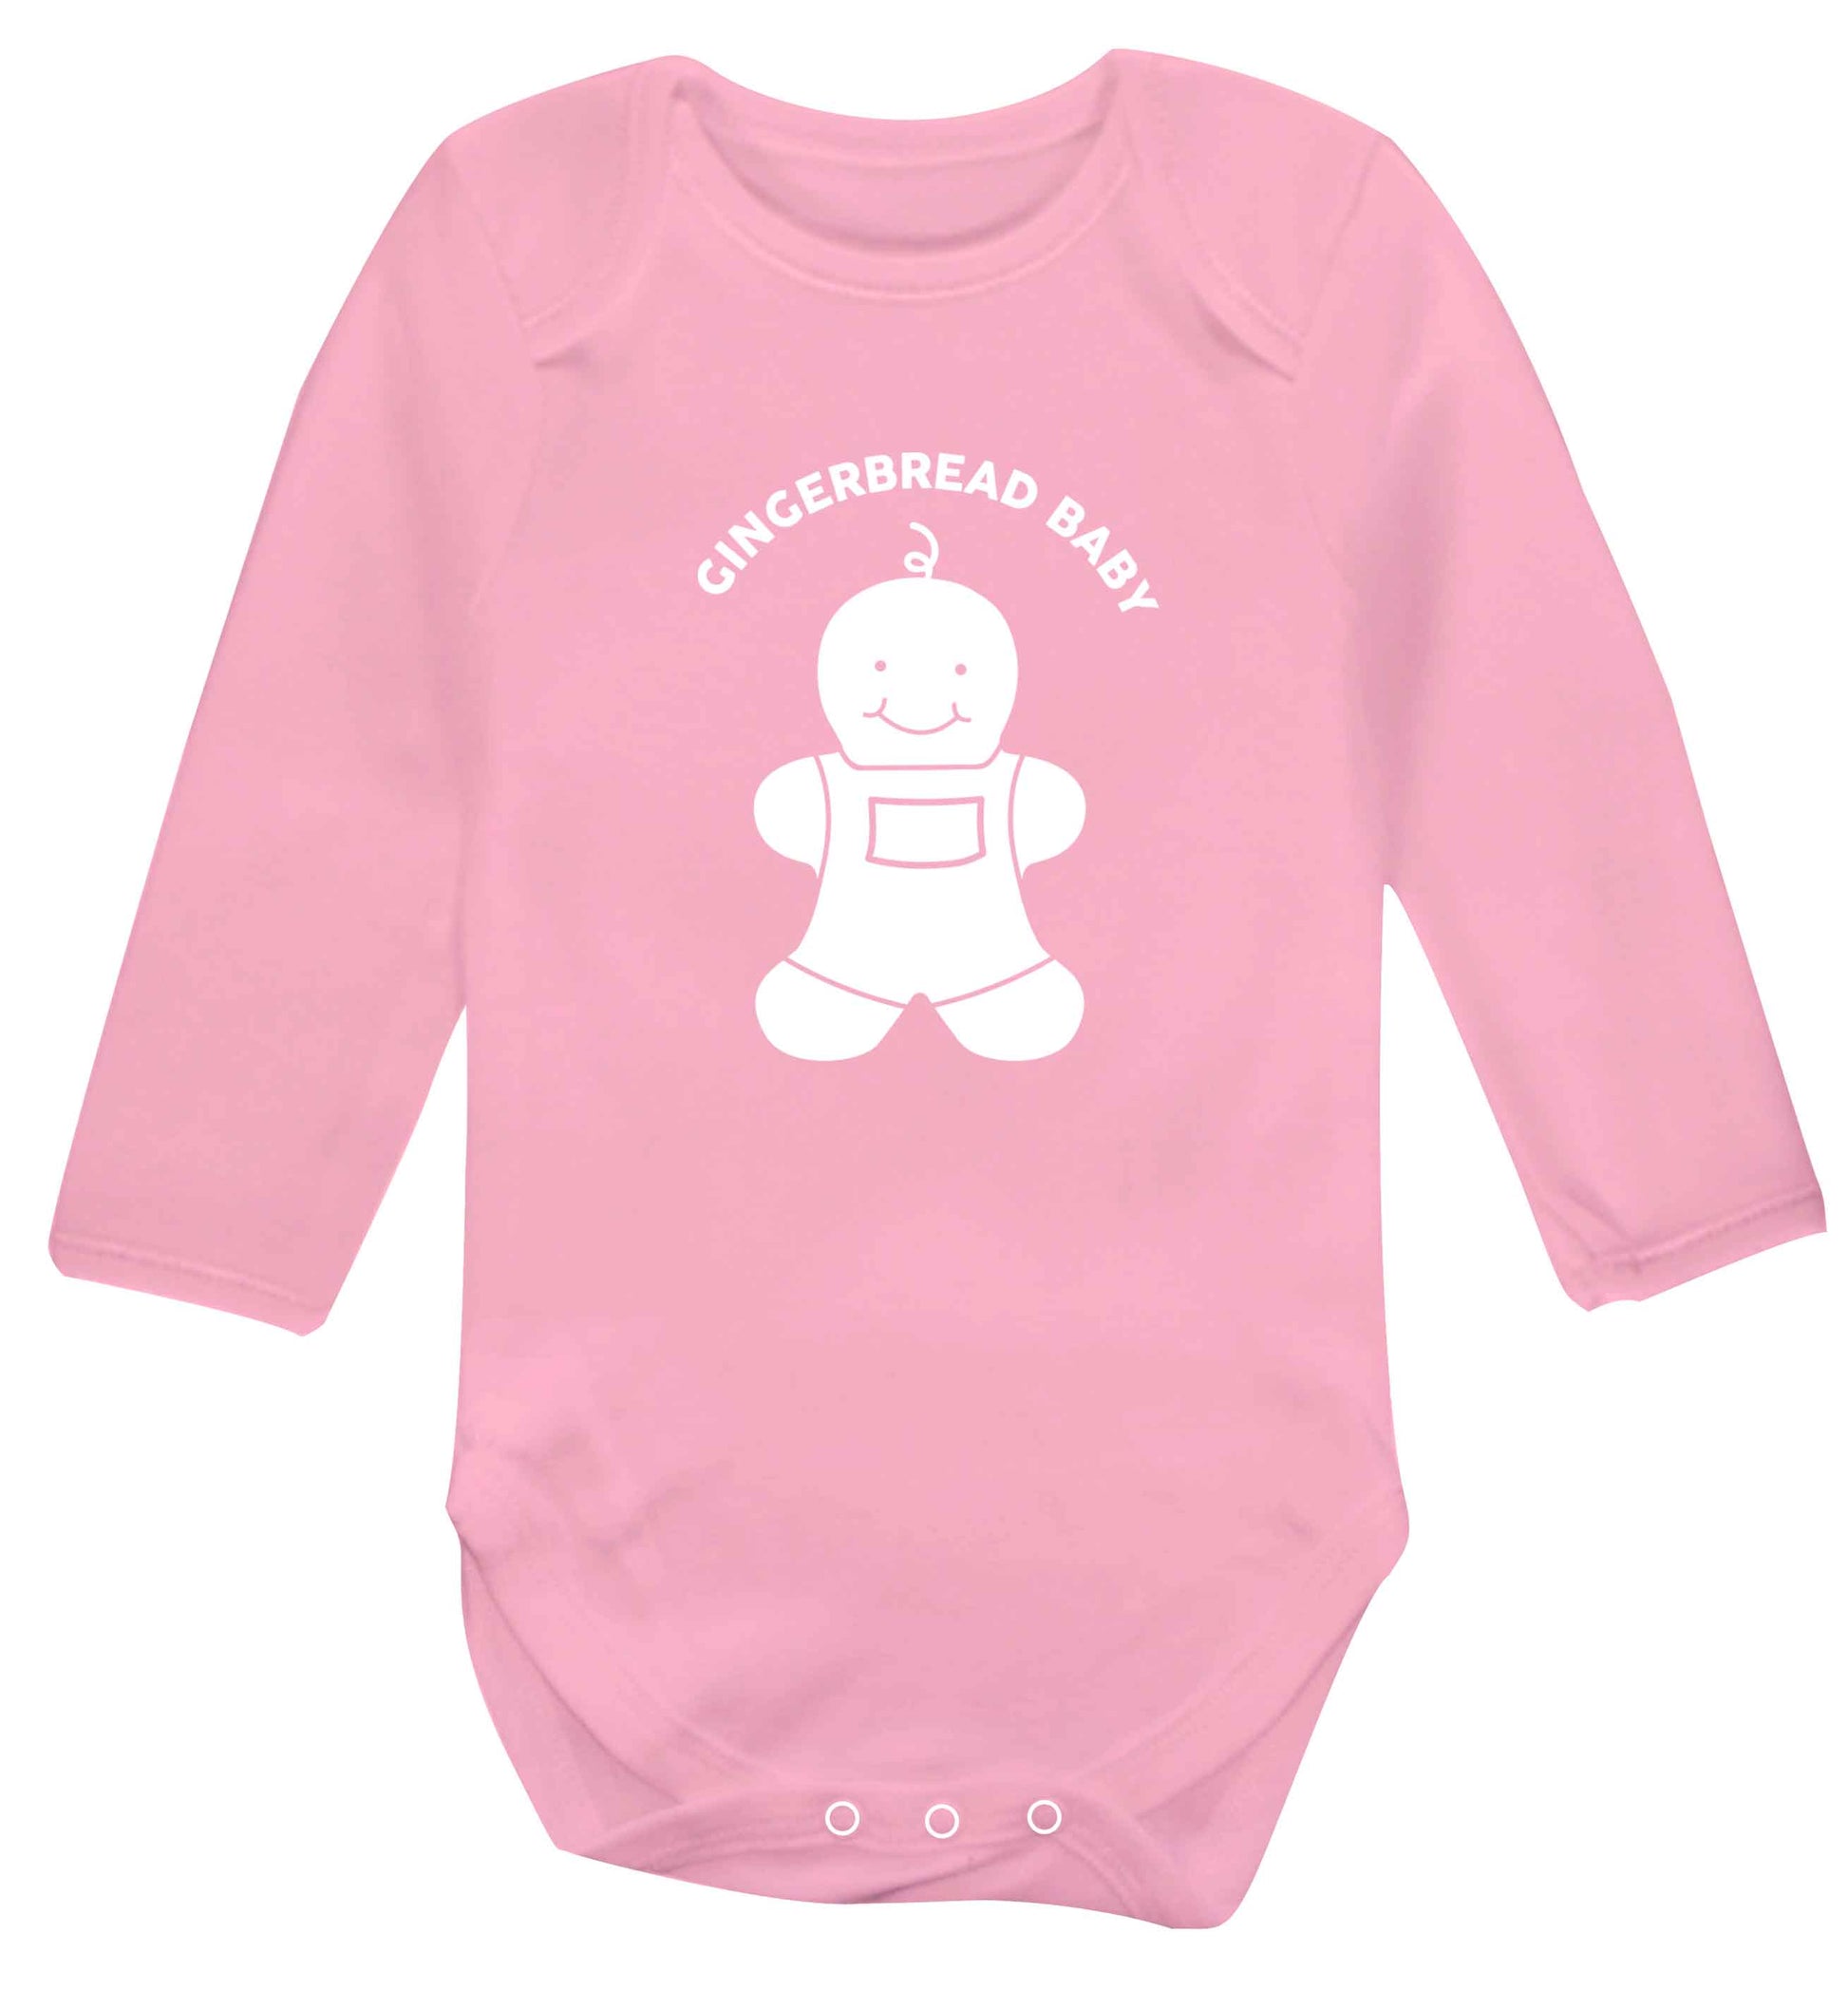 Gingerbread baby baby vest long sleeved pale pink 6-12 months